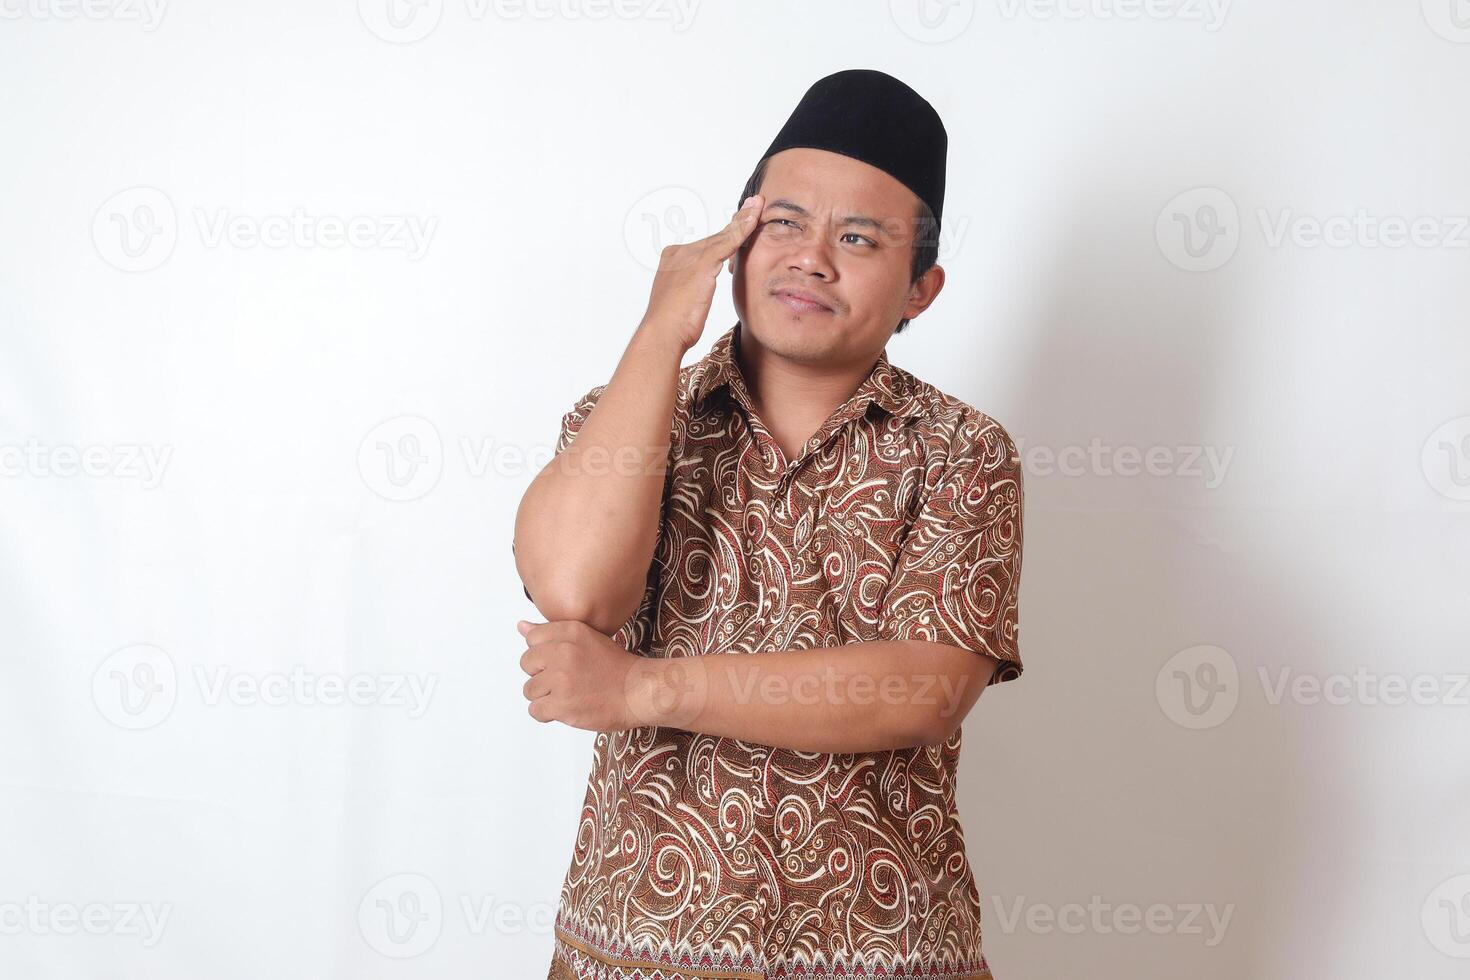 Portrait of suffering Asian man wearing batik shirt and songkok having headache while touching his forehead area. Isolated image on gray background photo